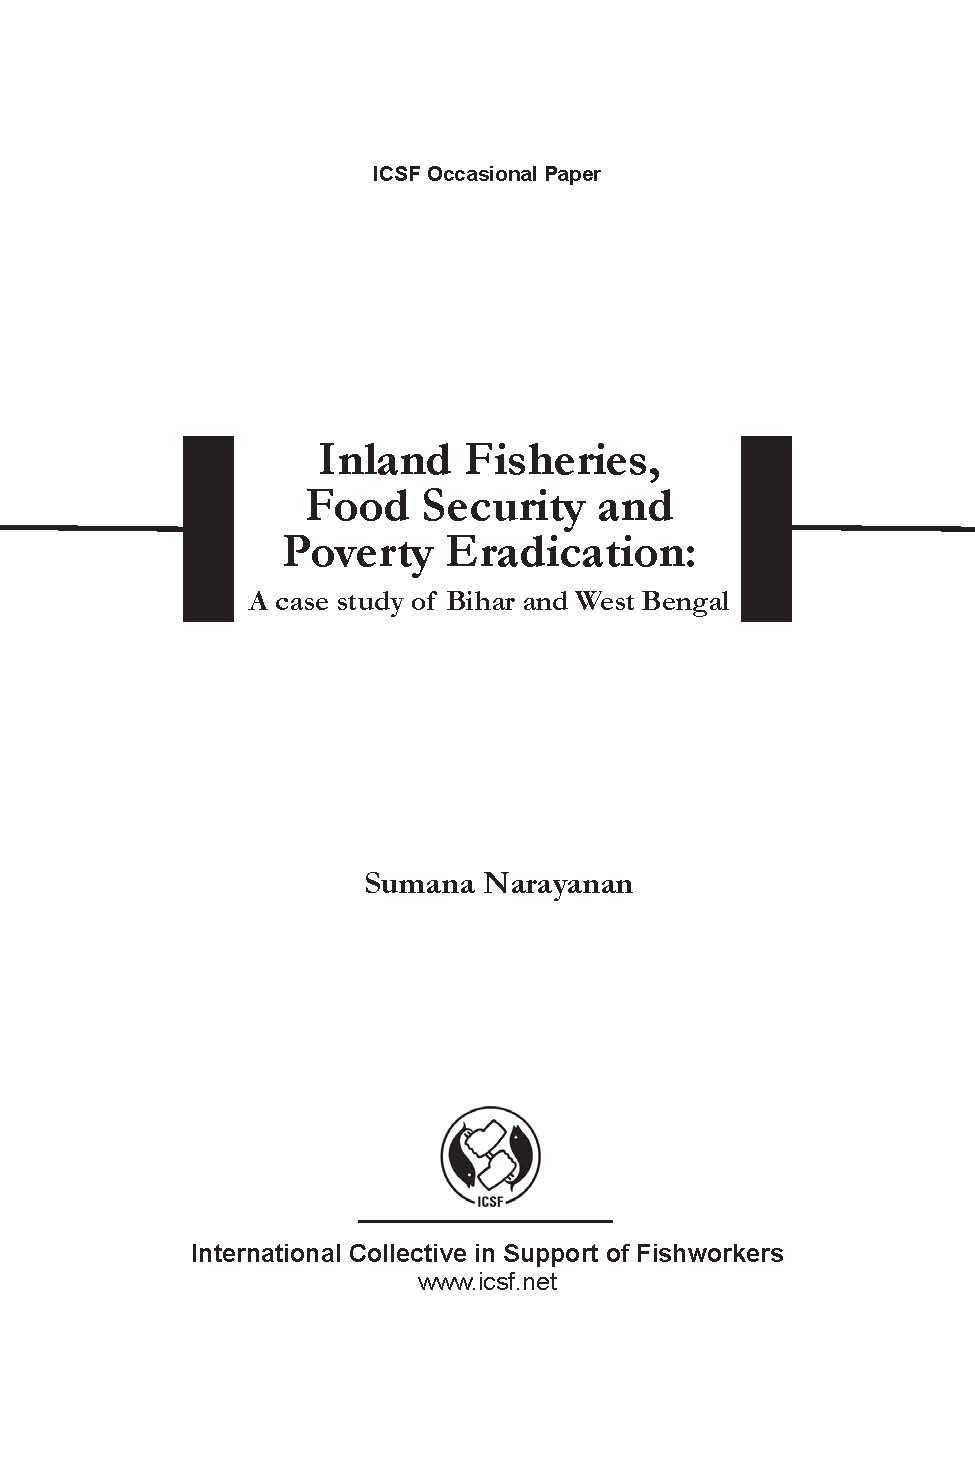 Inland Fisheries, Food Security and Poverty Eradication: A case study of Bihar and West Bengal